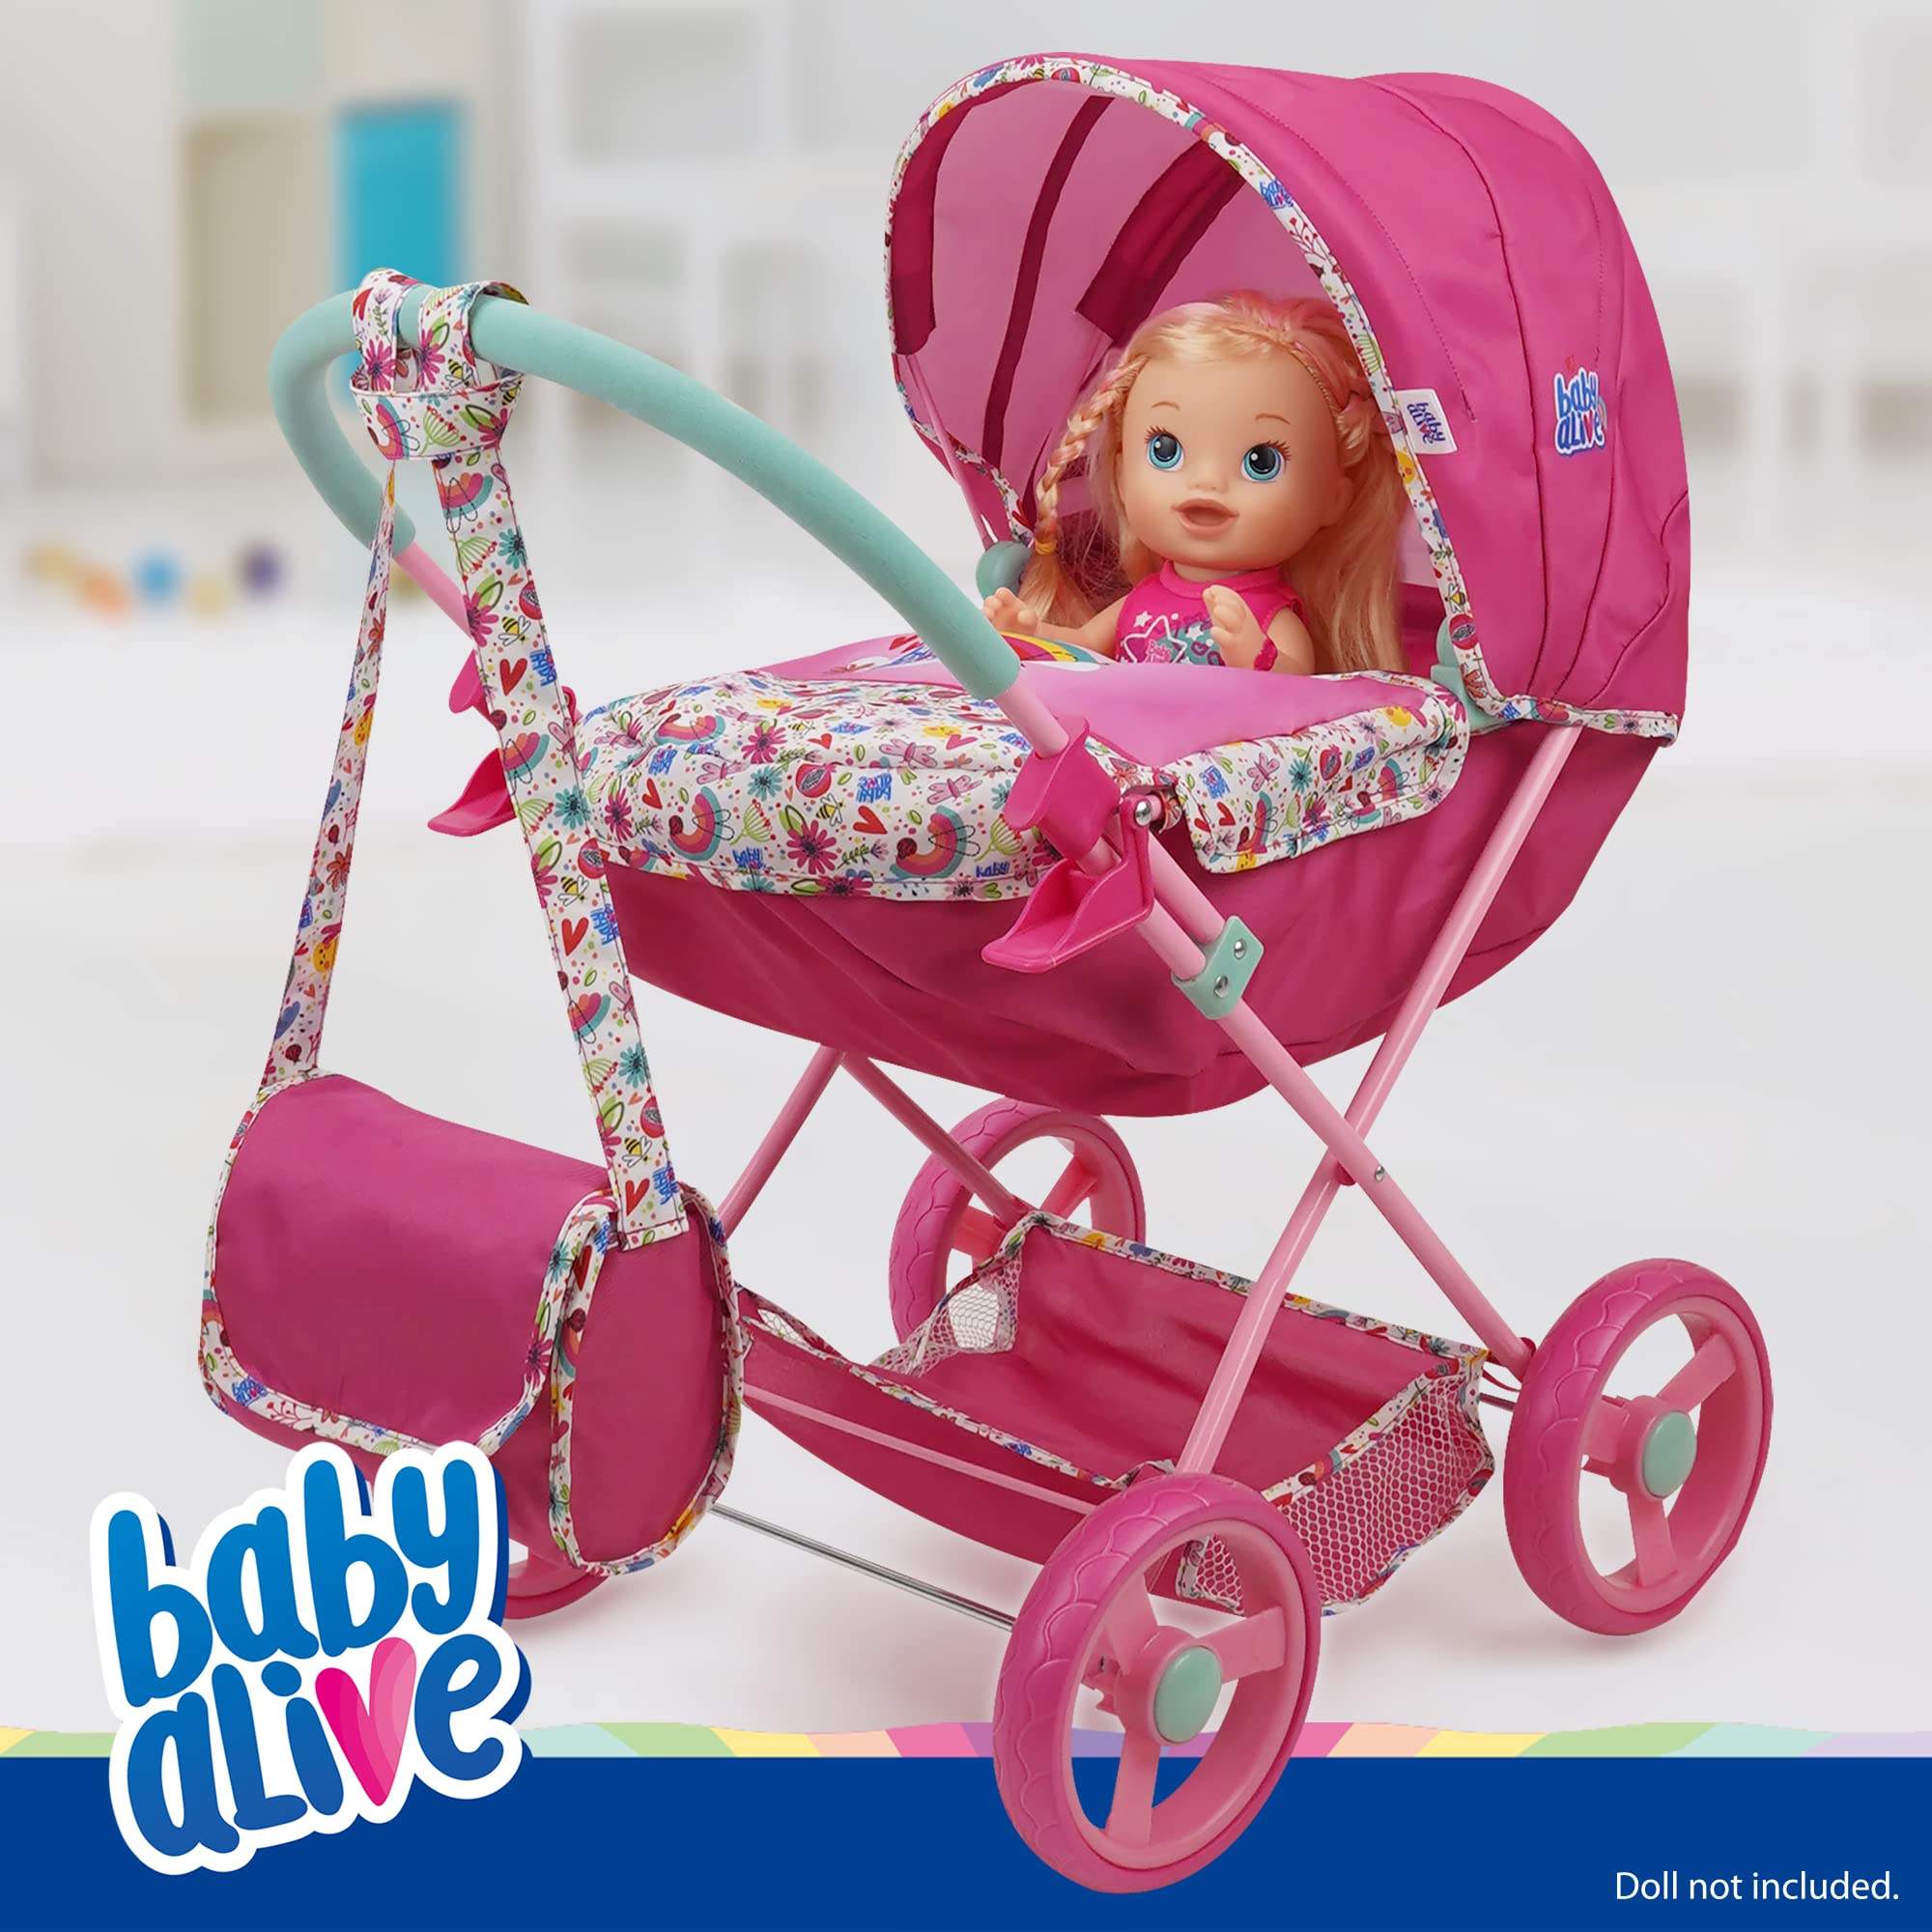 Baby Alive: Deluxe Classic Doll Pram - Pink & Rainbow - Includes Matching Handbag/Diaper Bag, Fits Dolls up to 18